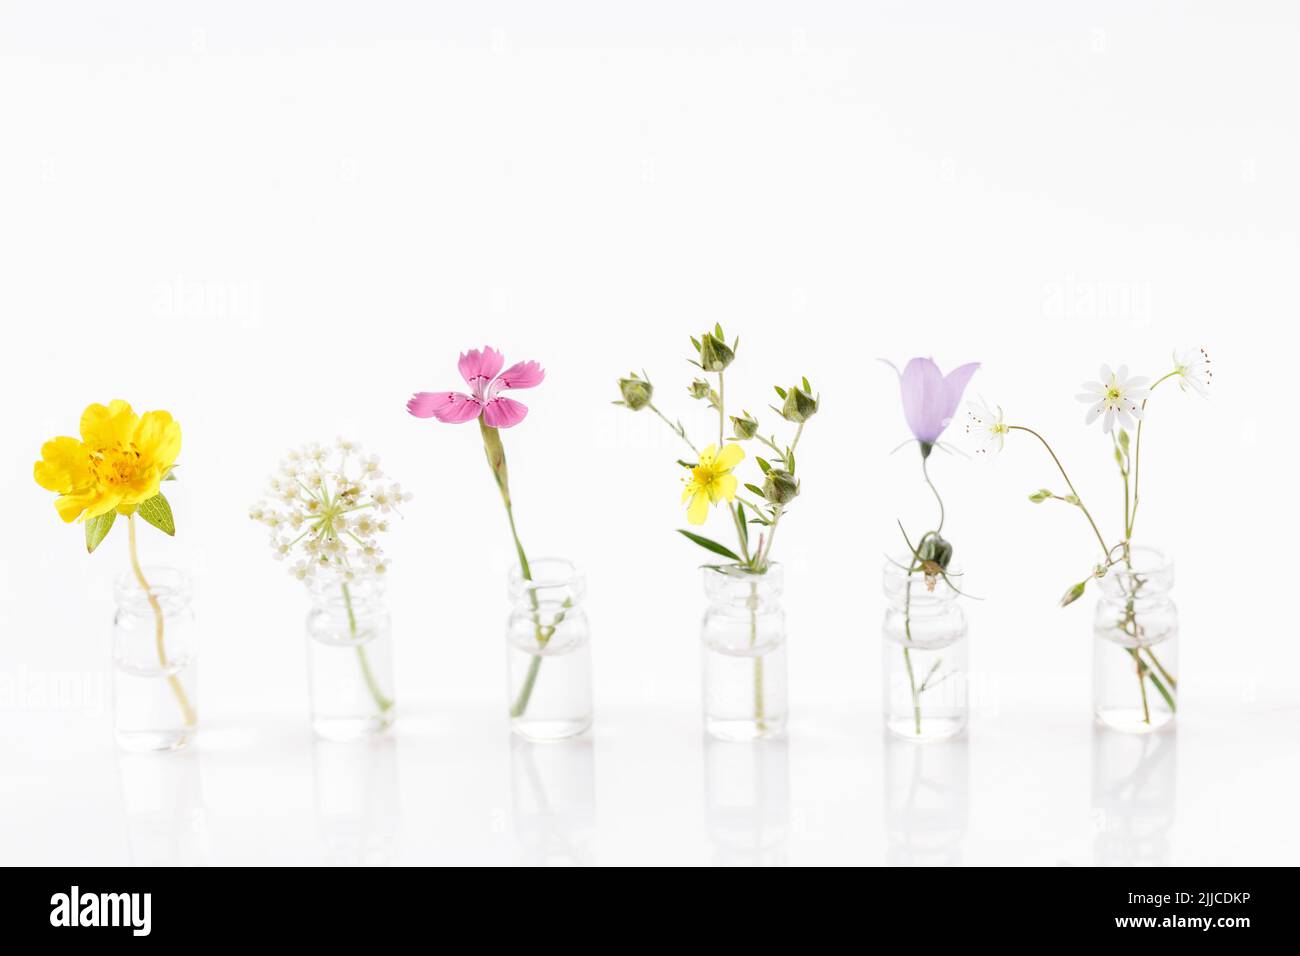 Different healing flowers in small glass bottles on white background Stock Photo